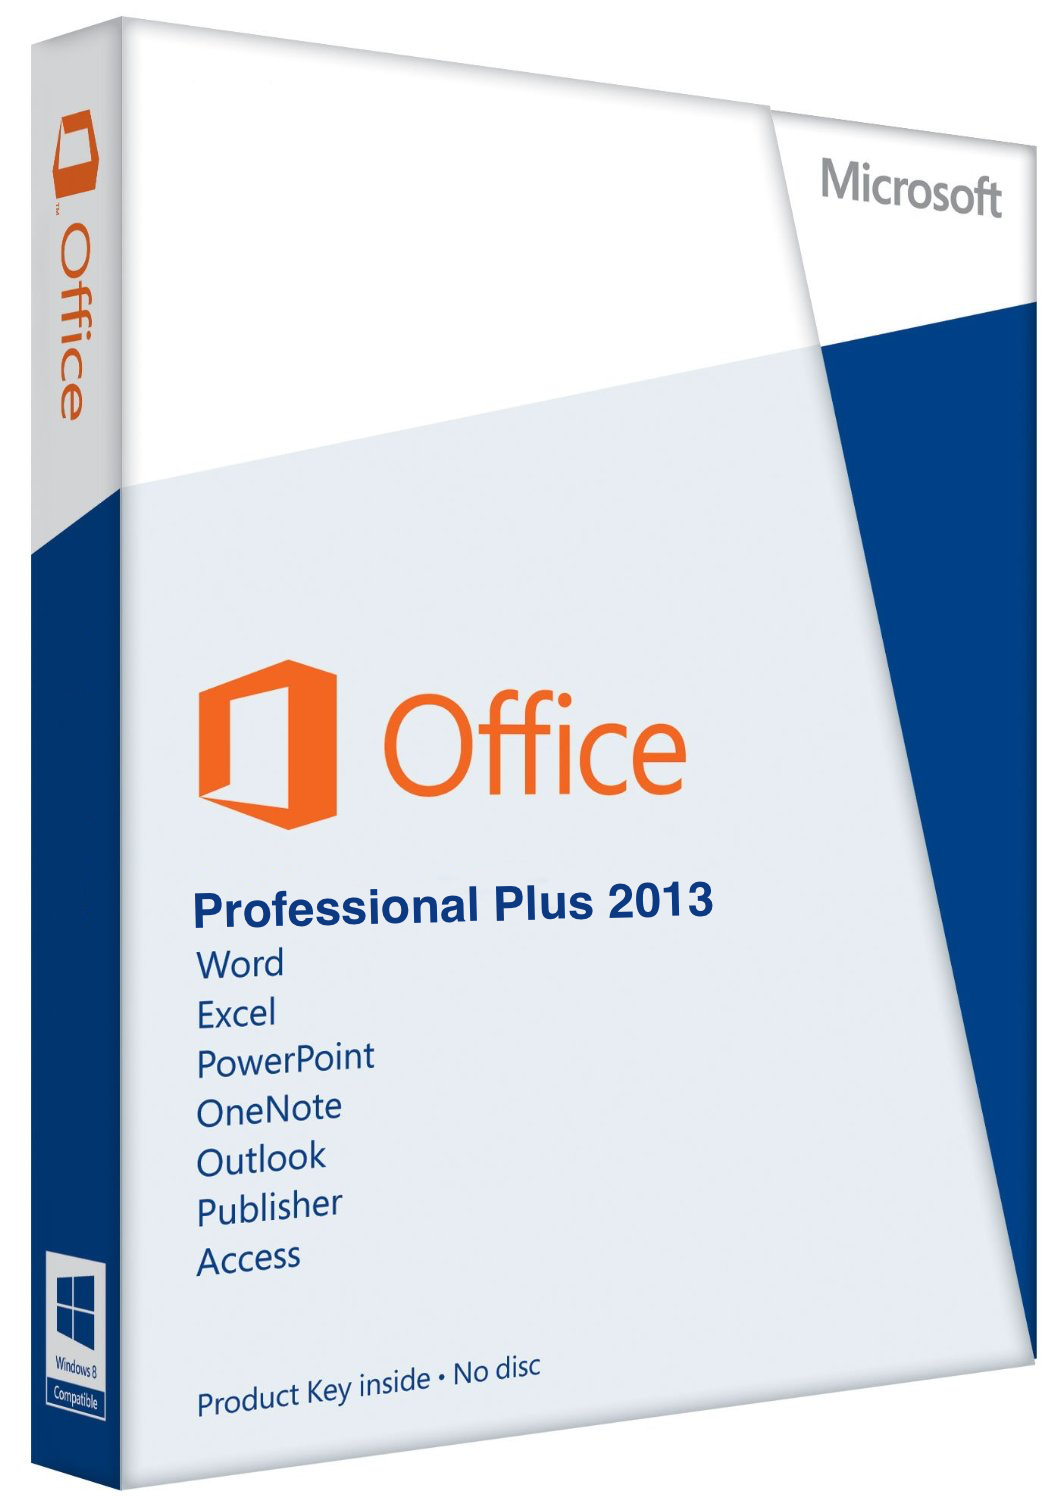 Microsoft office 2013 crack file free download